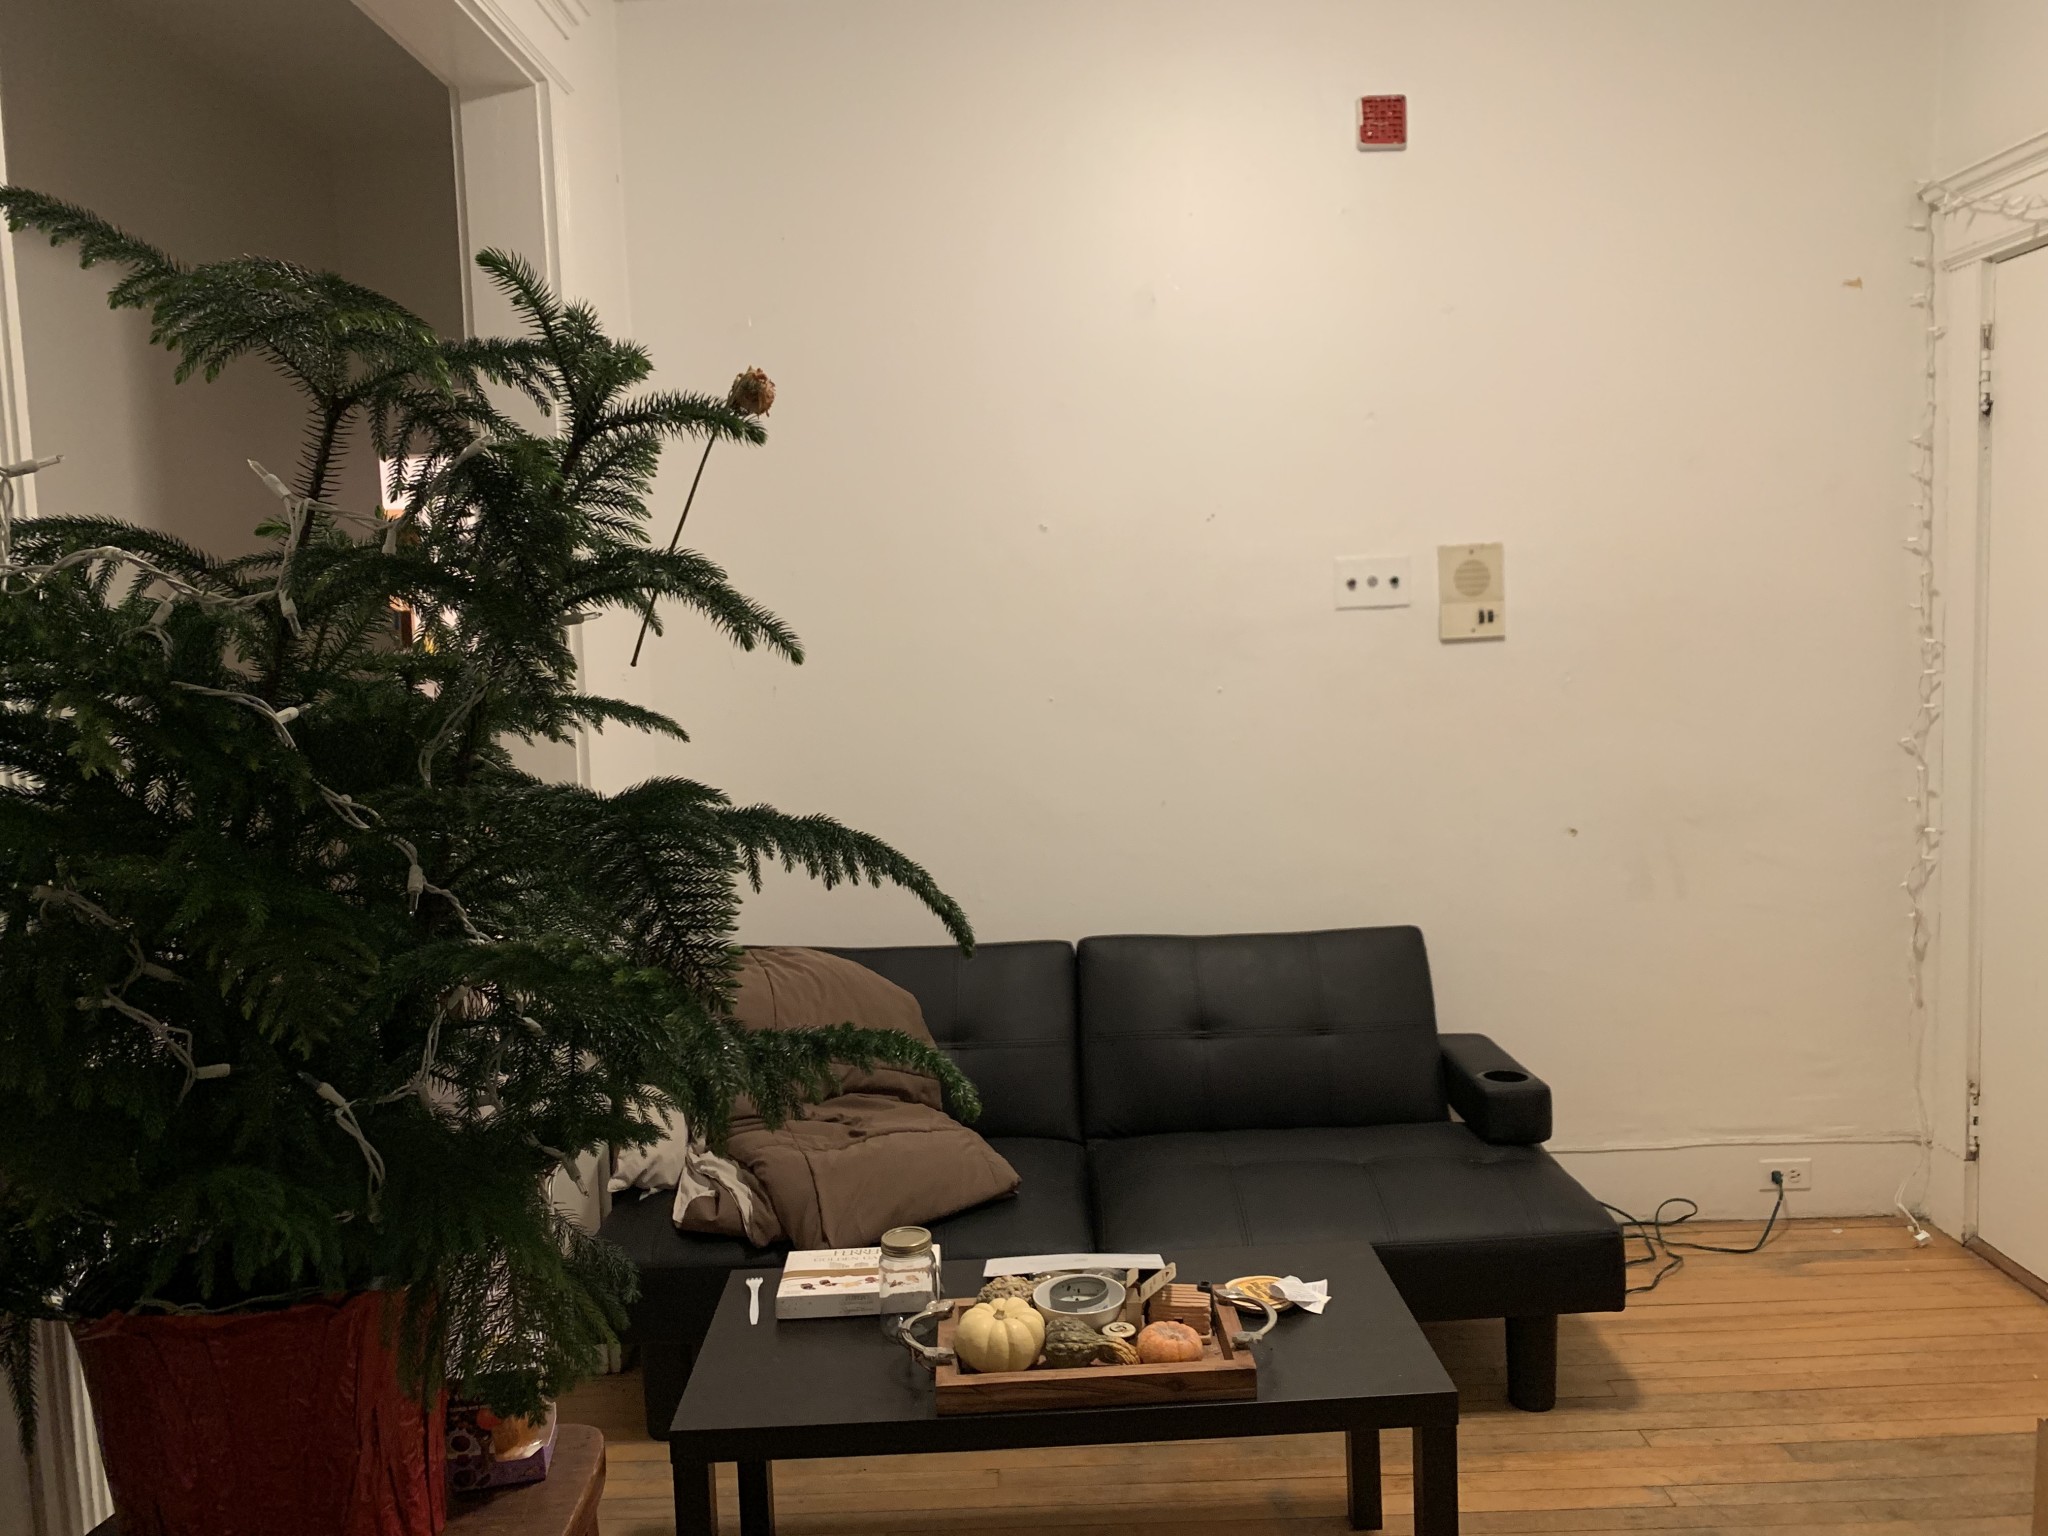 Photos of apartment on Spofford Rd.,Boston MA 02134